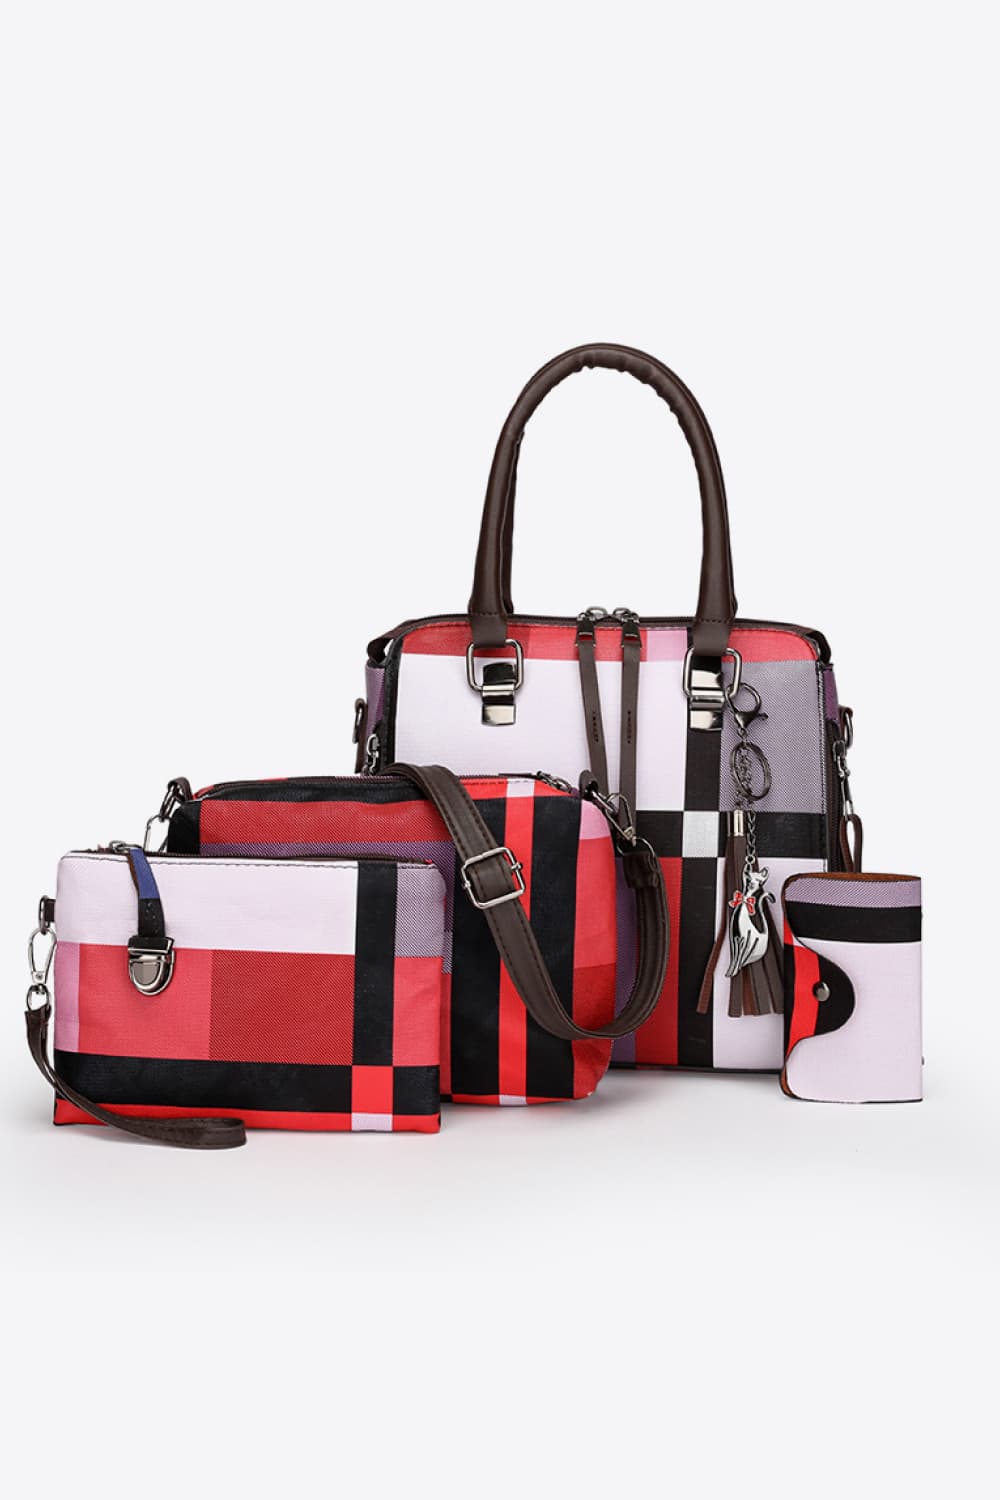 4-Piece Color Block PU Leather Bag Set Red One Size